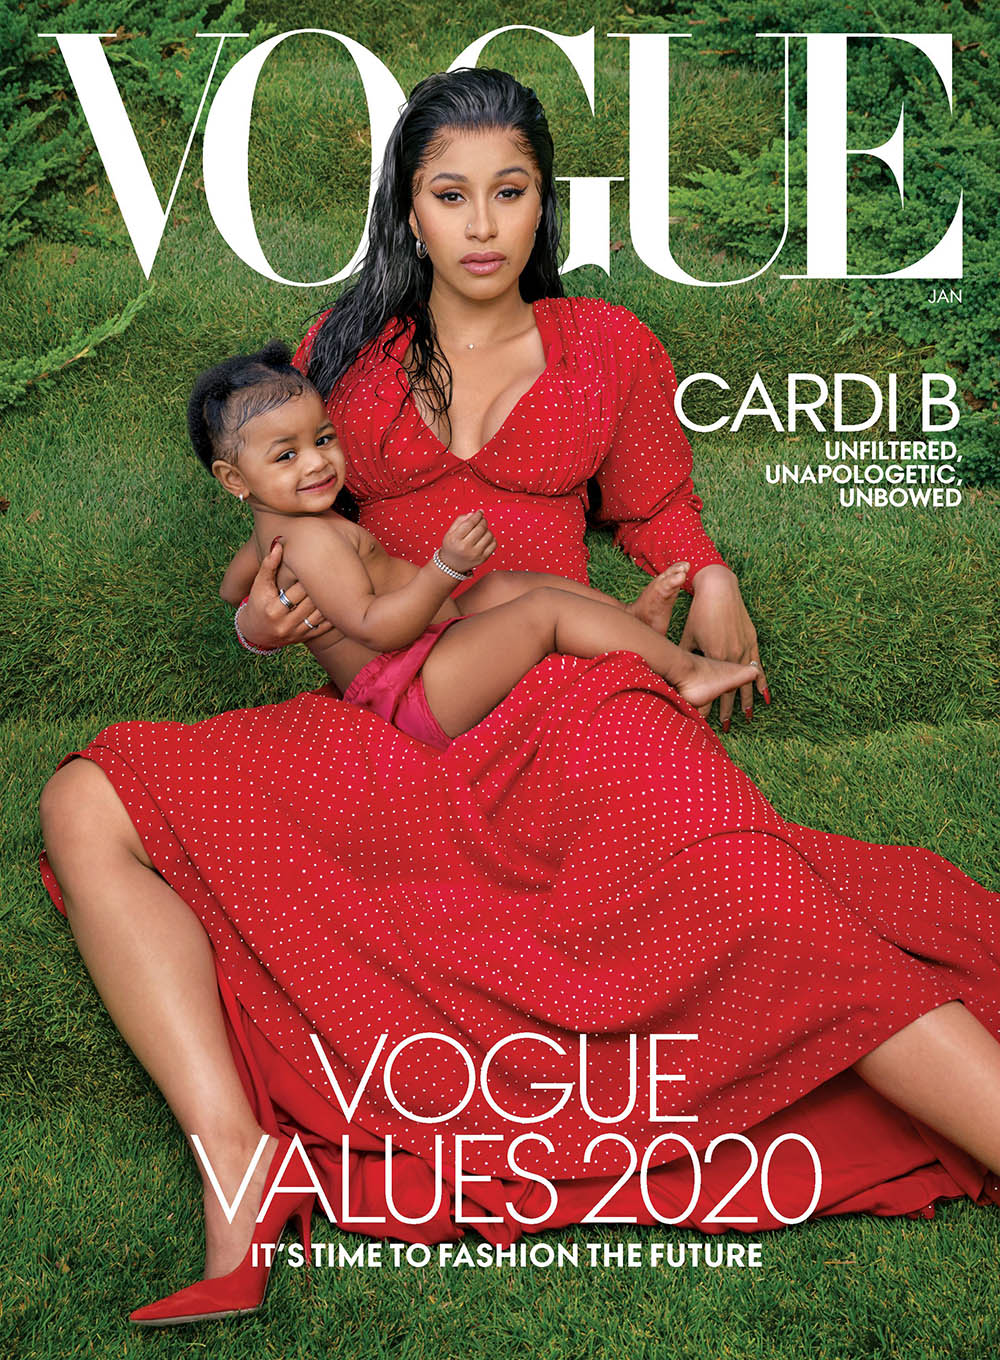 Vogue US January 2020 covers by Annie Leibovitz